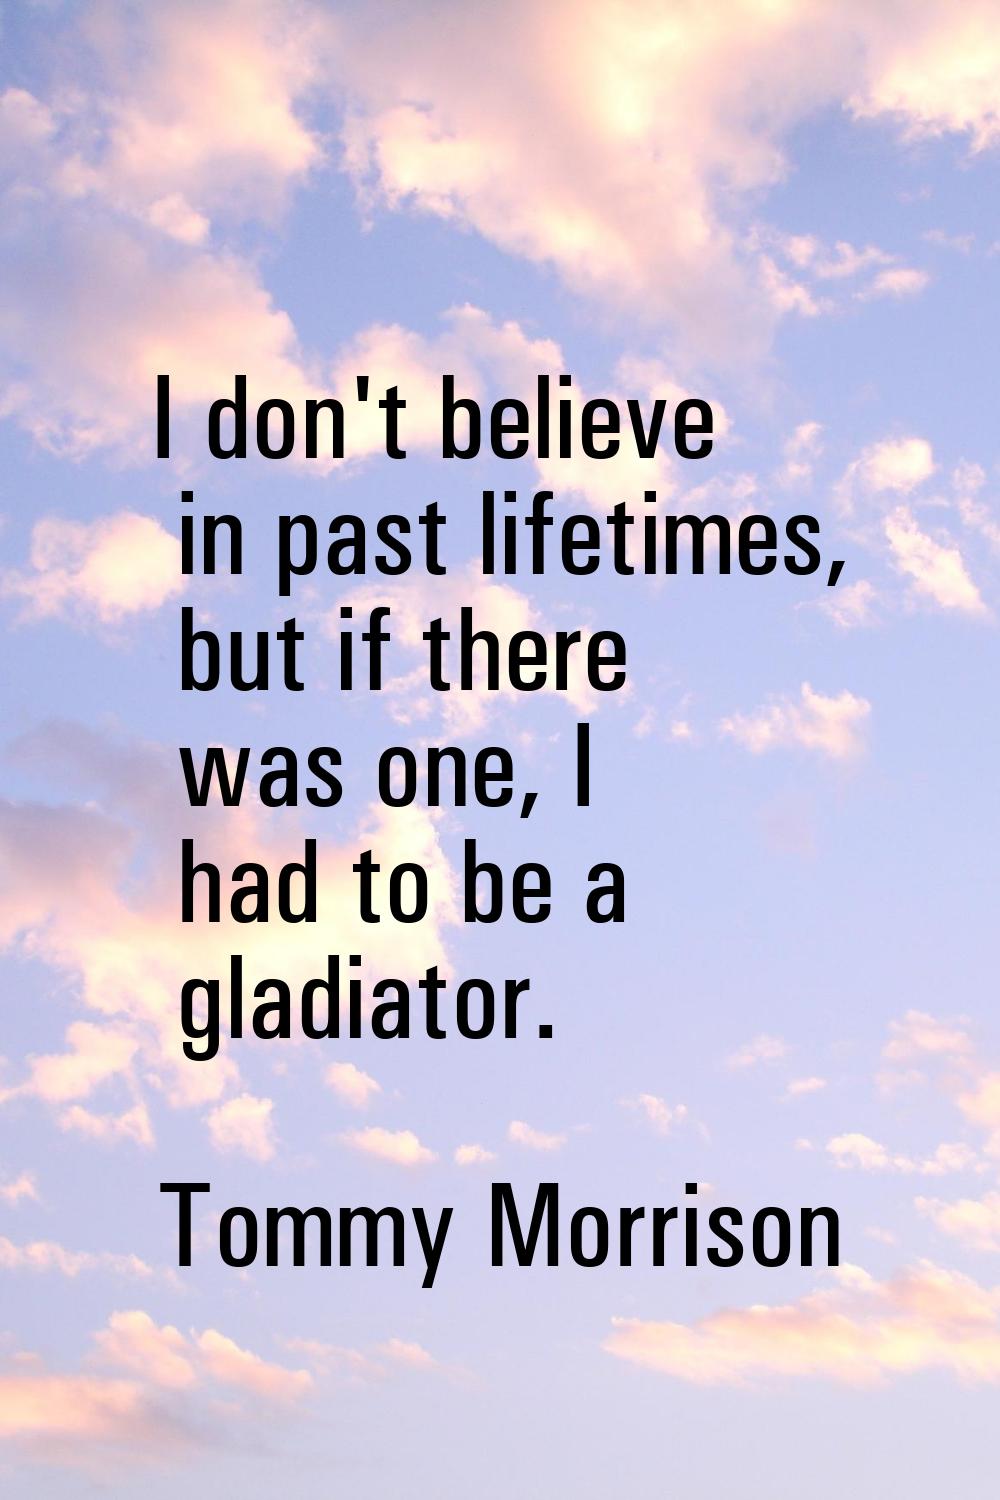 I don't believe in past lifetimes, but if there was one, I had to be a gladiator.